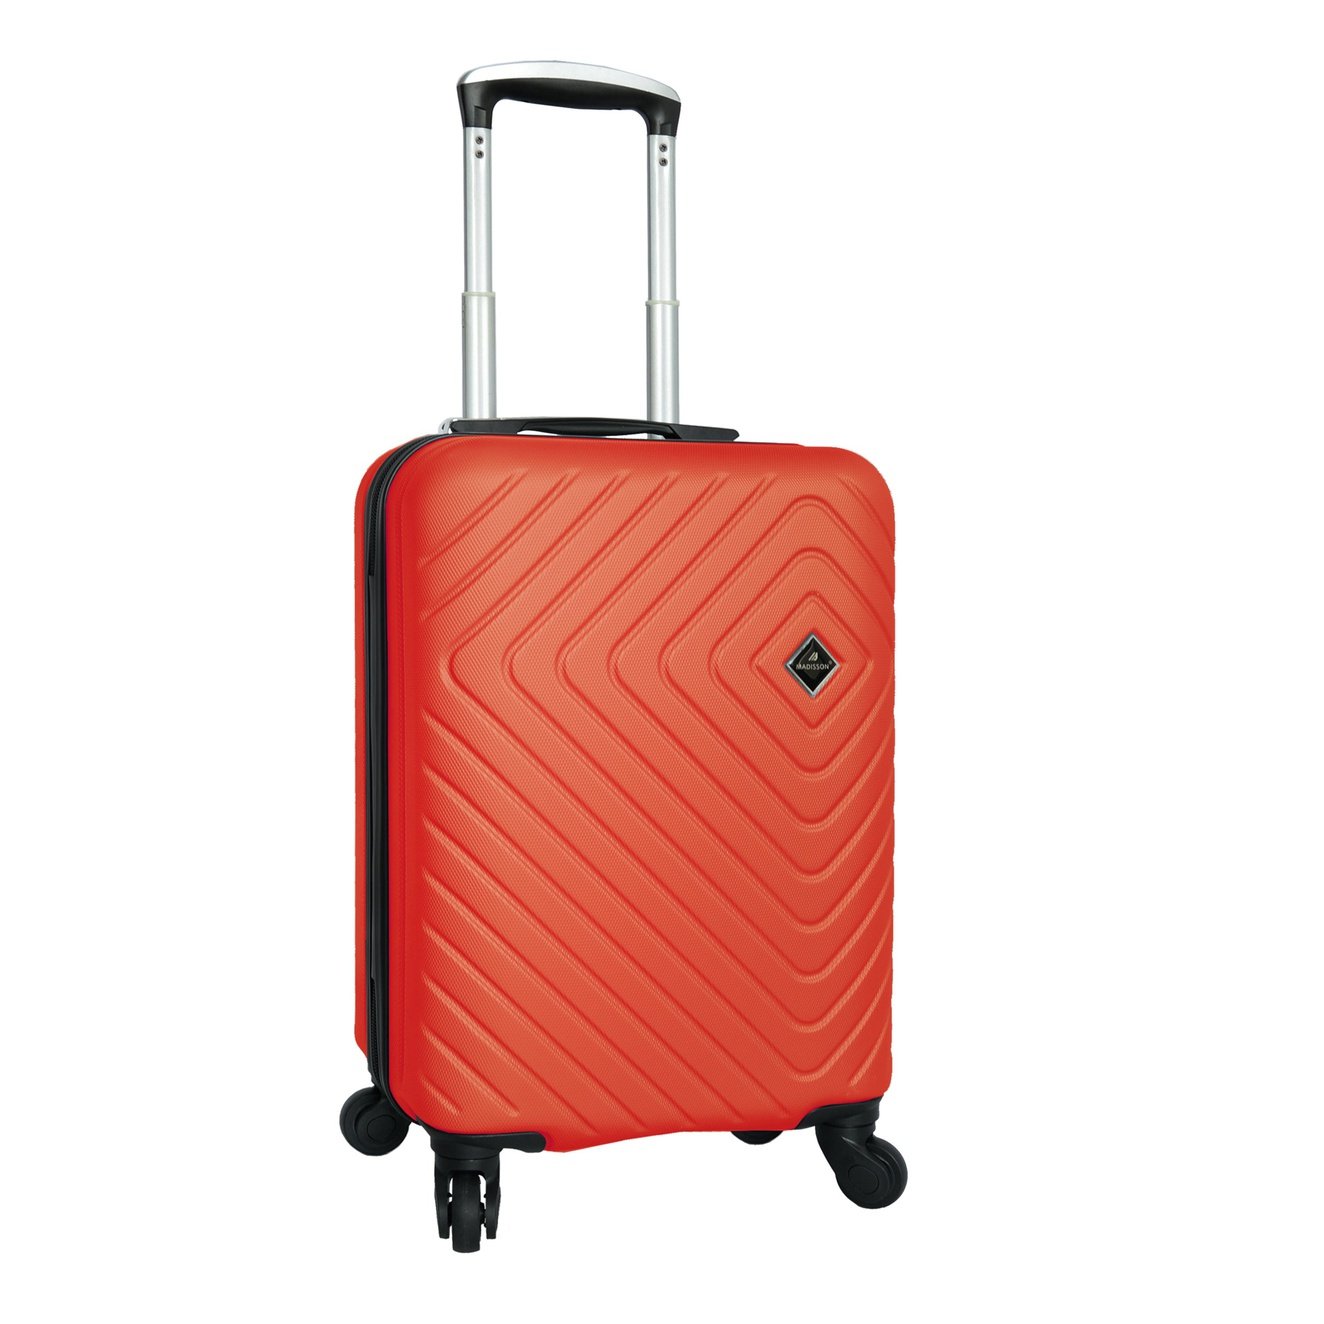 Easy Luggage Madisson Super Lightweight Hard Shell Luggage featuring 4 smooth-rolling spinner wheels Coral